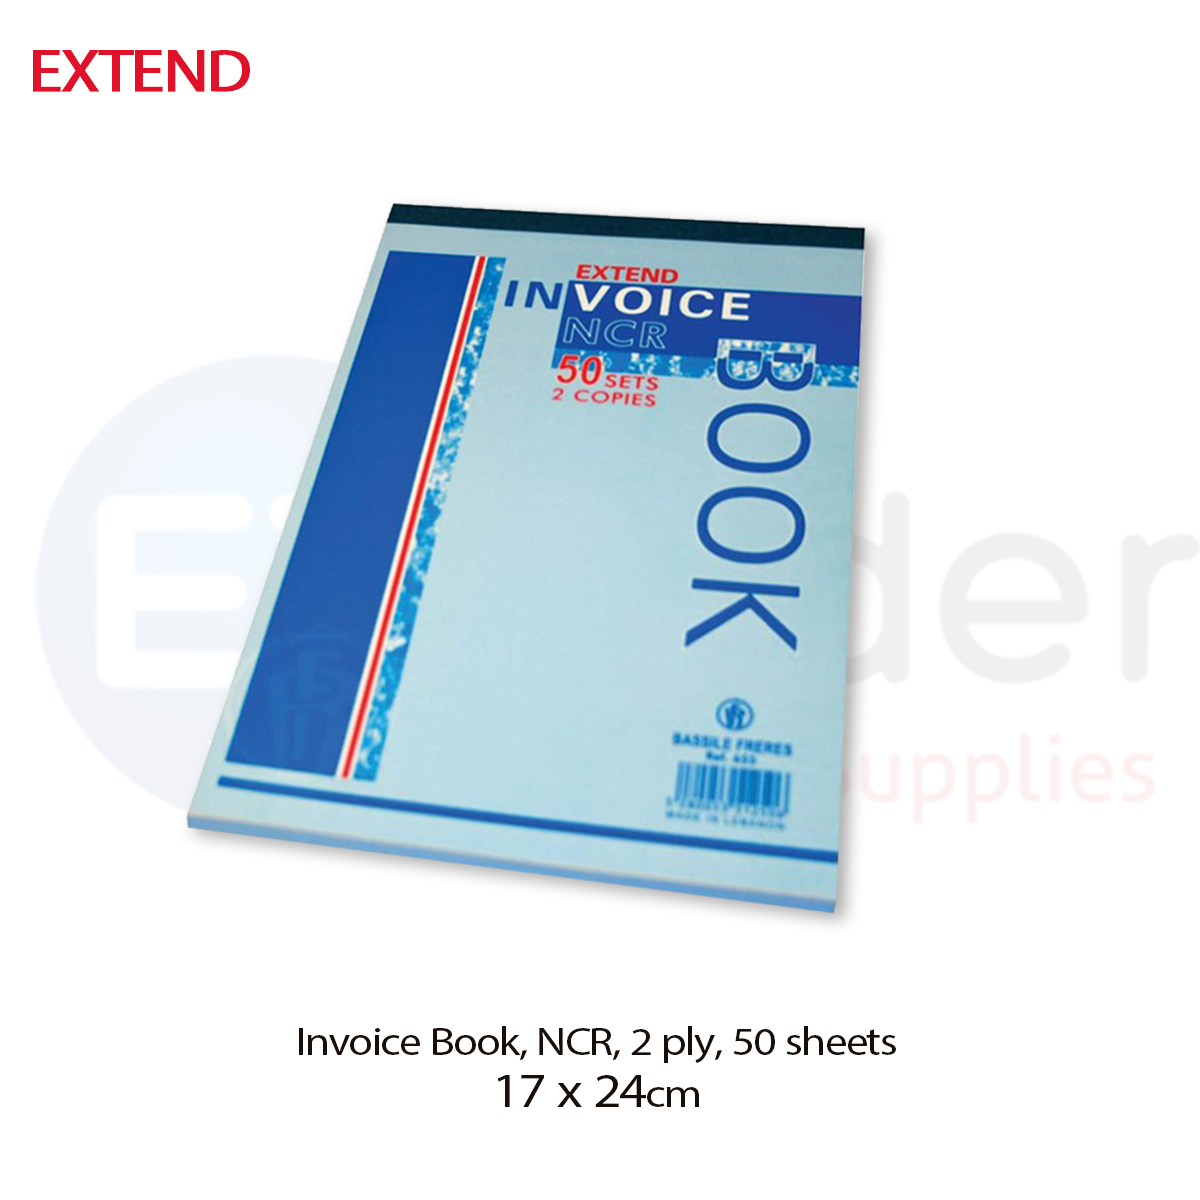 Invoice book, NCR, 2 ply, 17x24cm,50 Sheets, Ref- 655